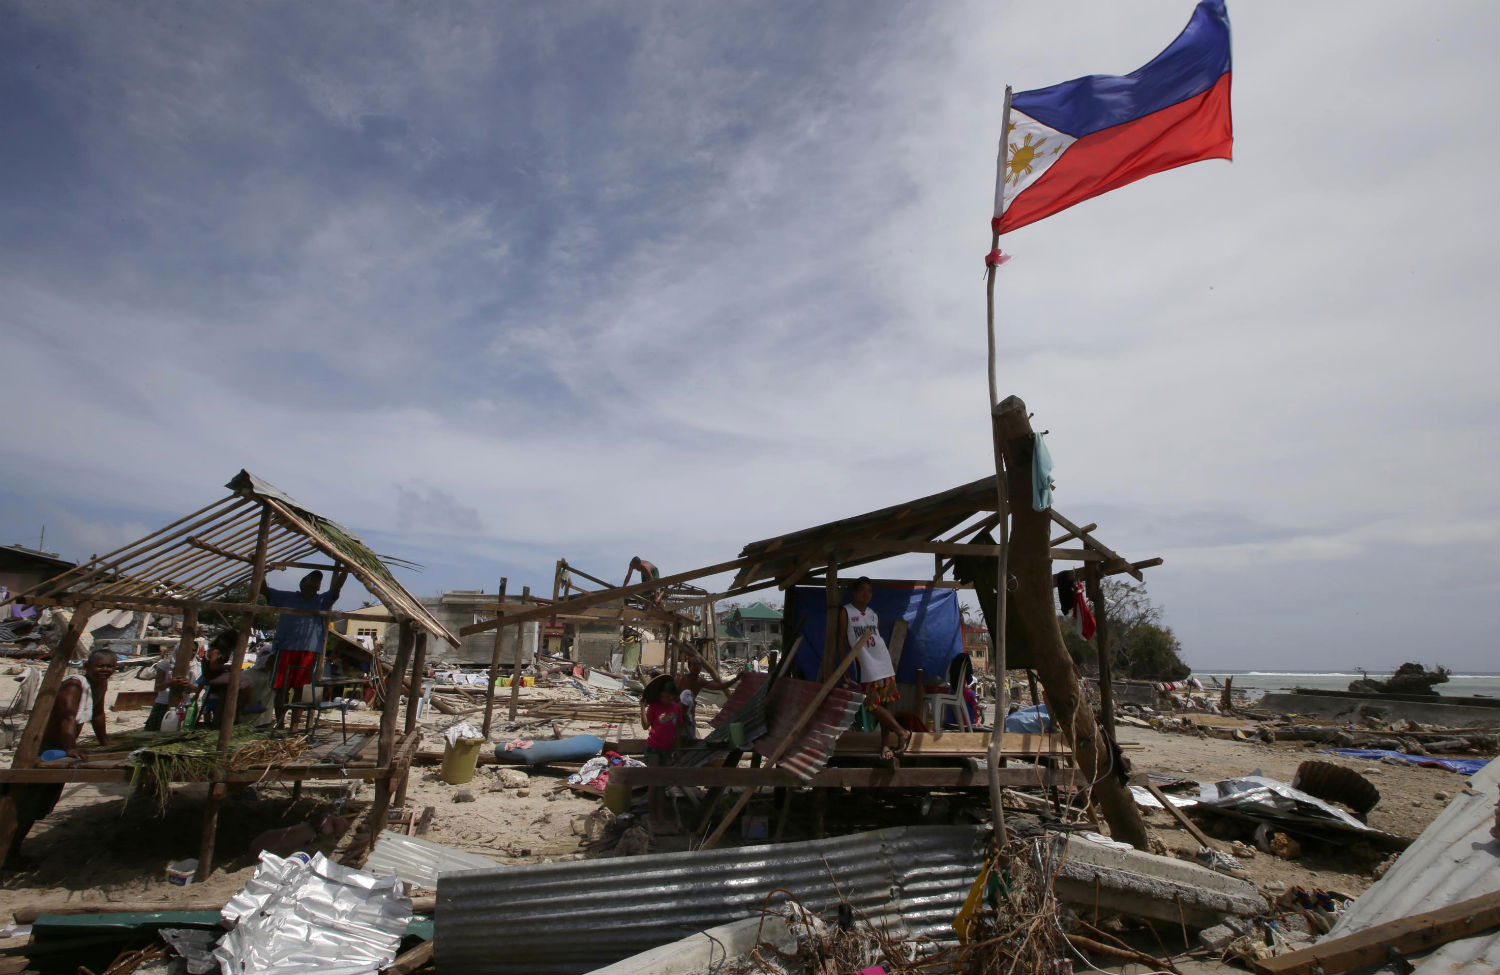 How to Help in the Philippines